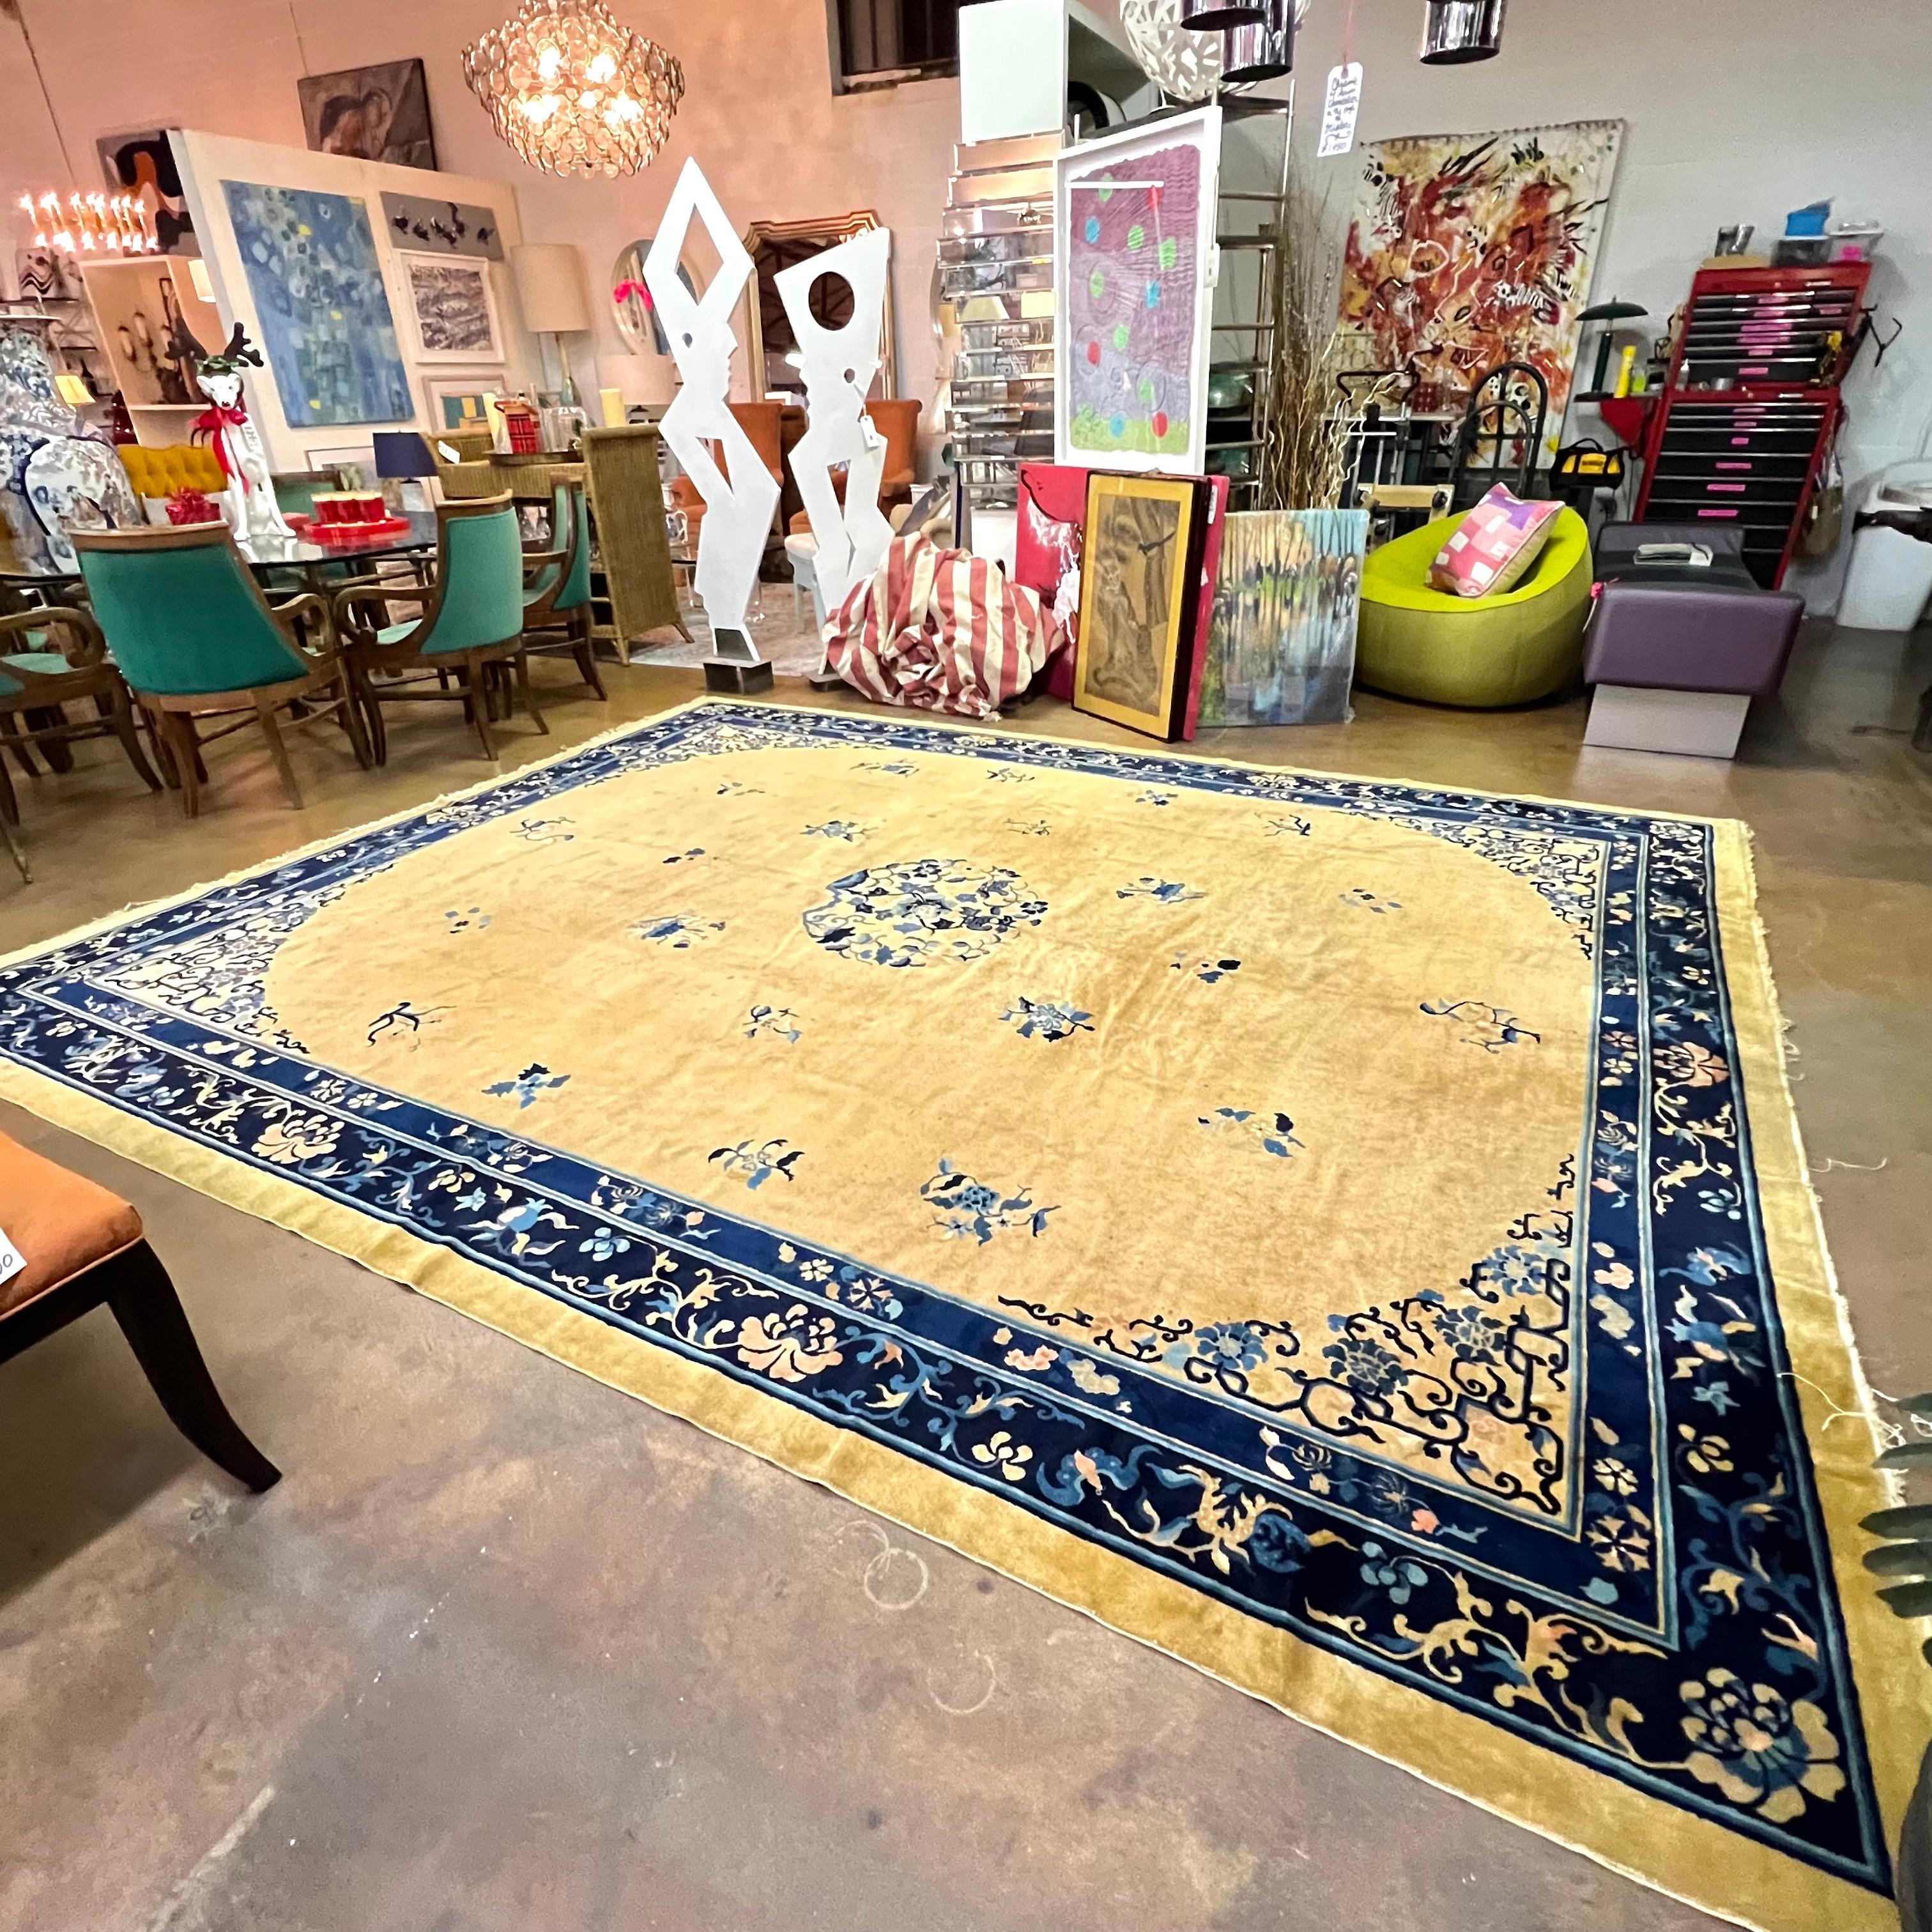 Amazing early 20th century Chinese Peking rug with a central floral medallion amidst a field of additional flowers on a beautiful gold field, surrounded by a deep blue border. Good antique condition; would benefit from professional cleaning.
10'W x